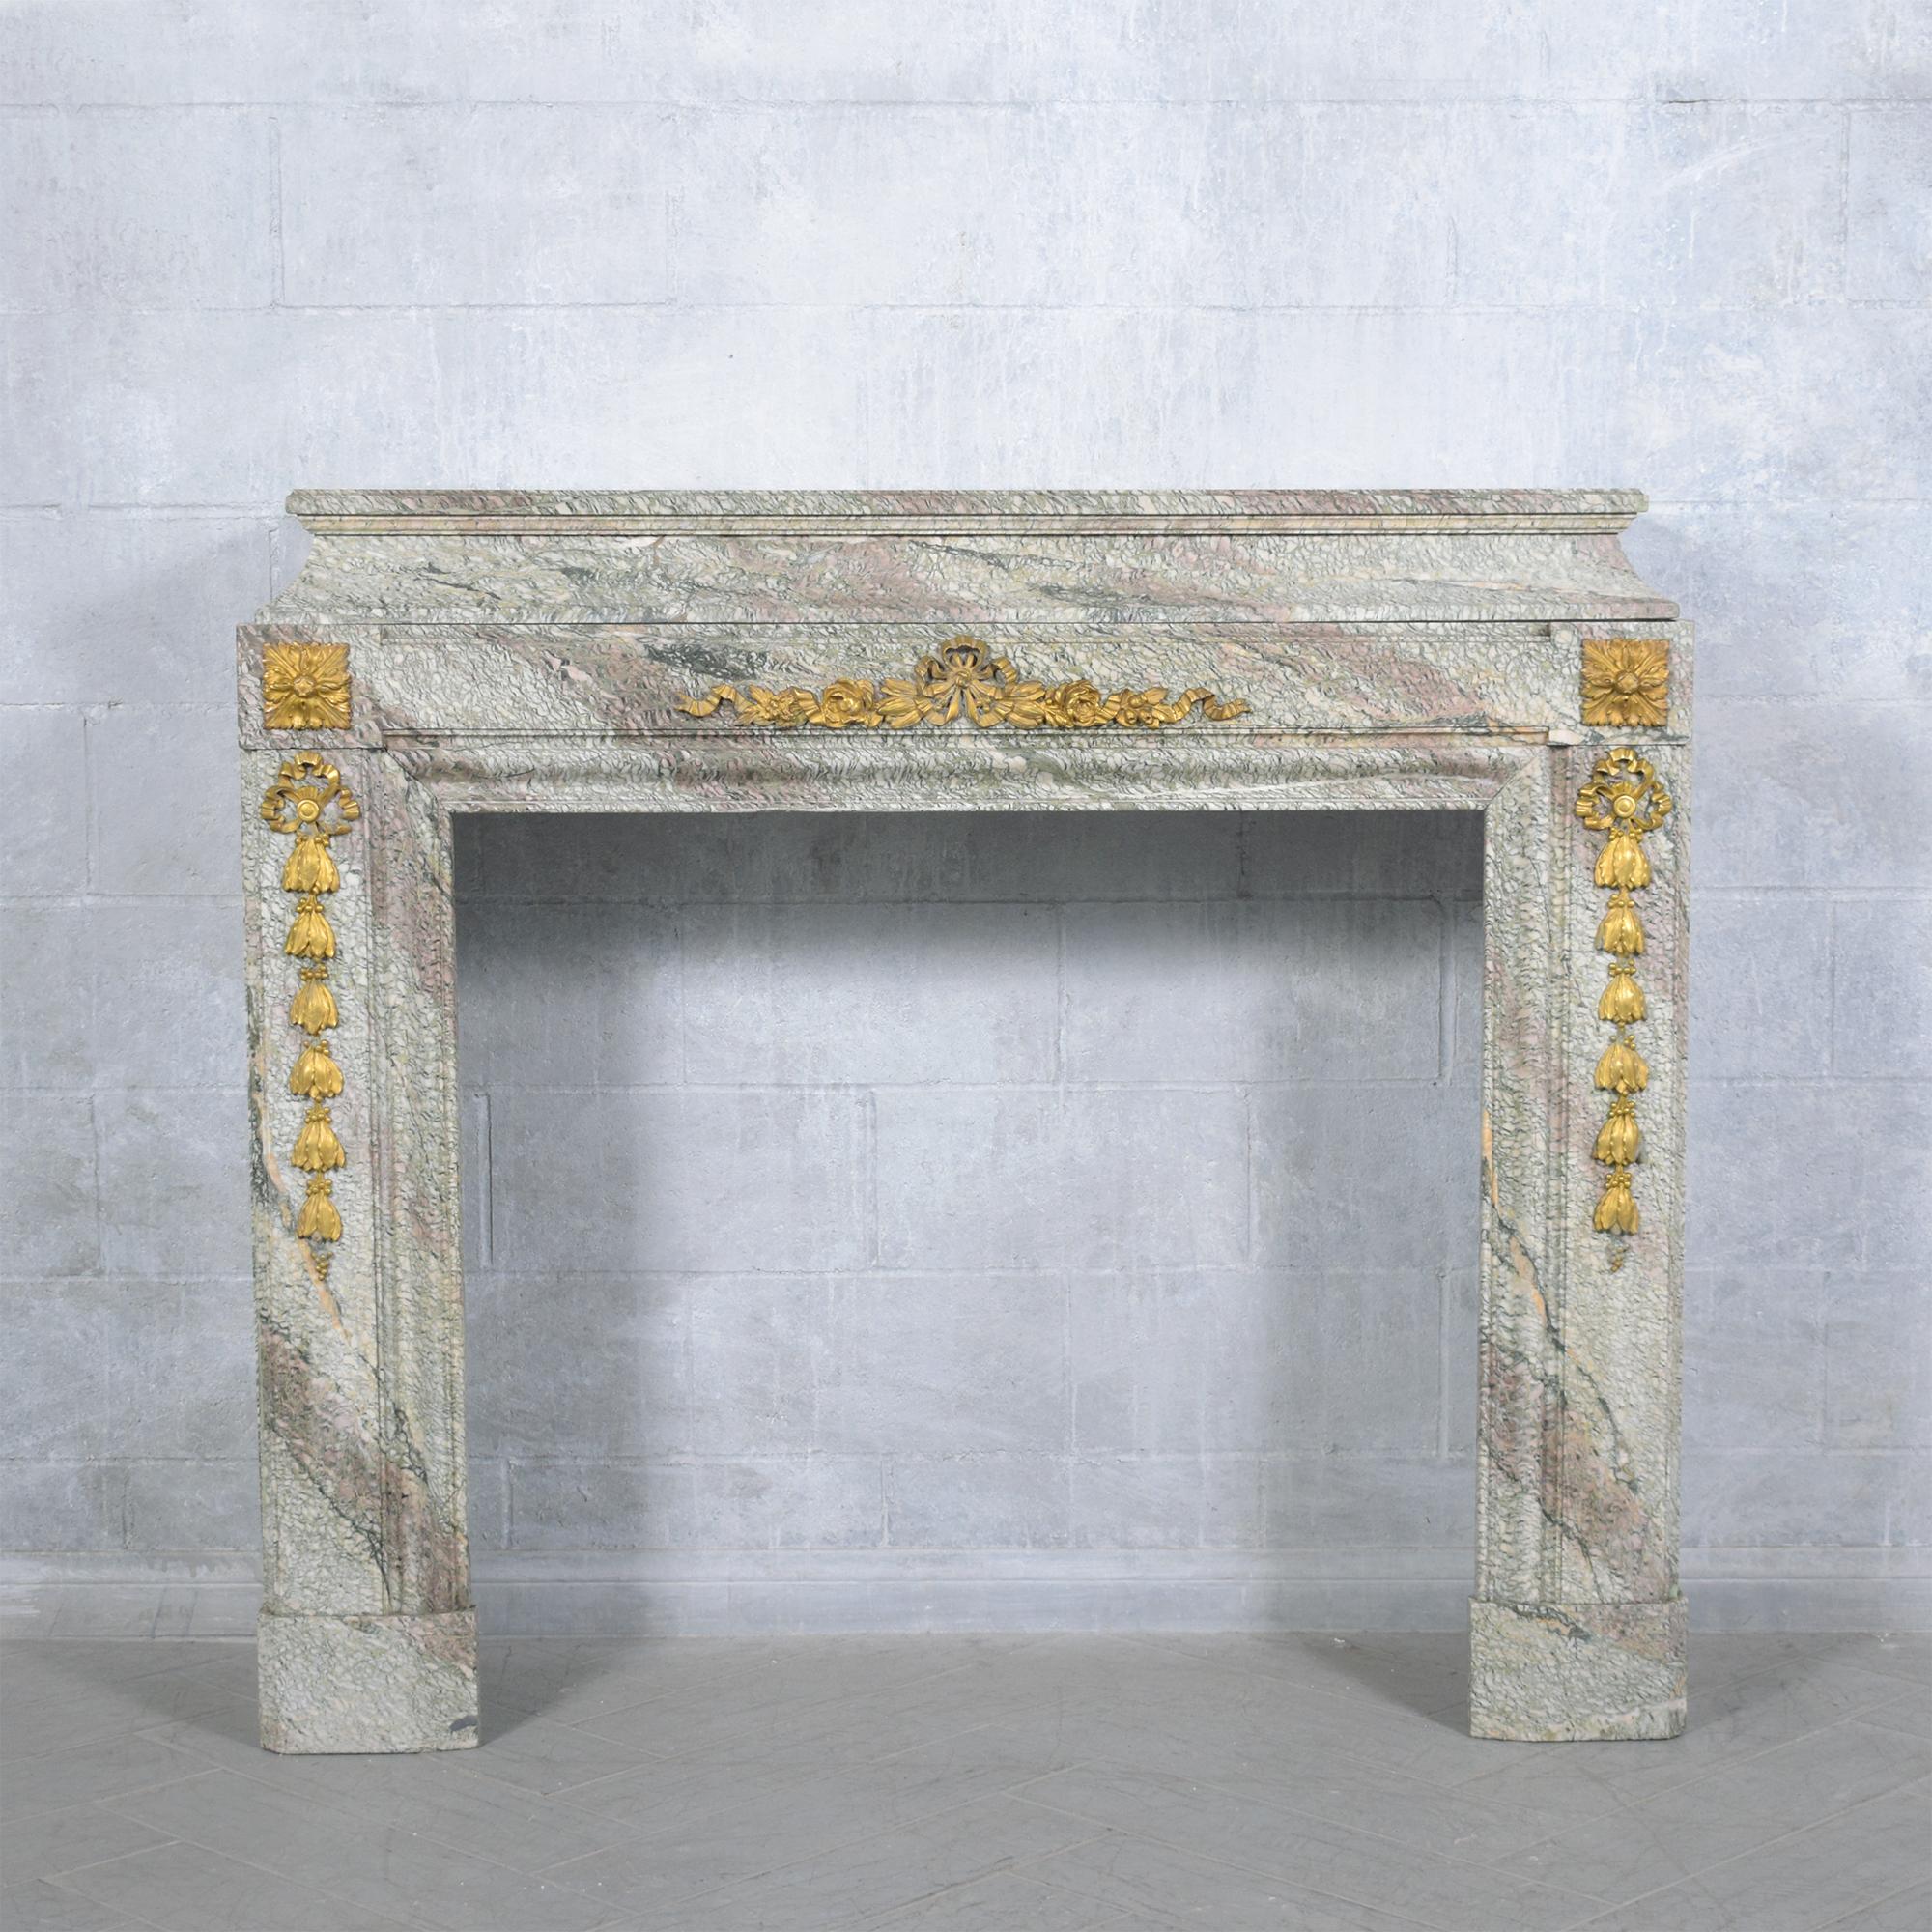 Experience the grandeur of the 19th Century with our exquisitely restored marble and brass mantle fireplace, a true masterpiece of French antique craftsmanship. Brought back to its original splendor by our team of professional craftsmen, this